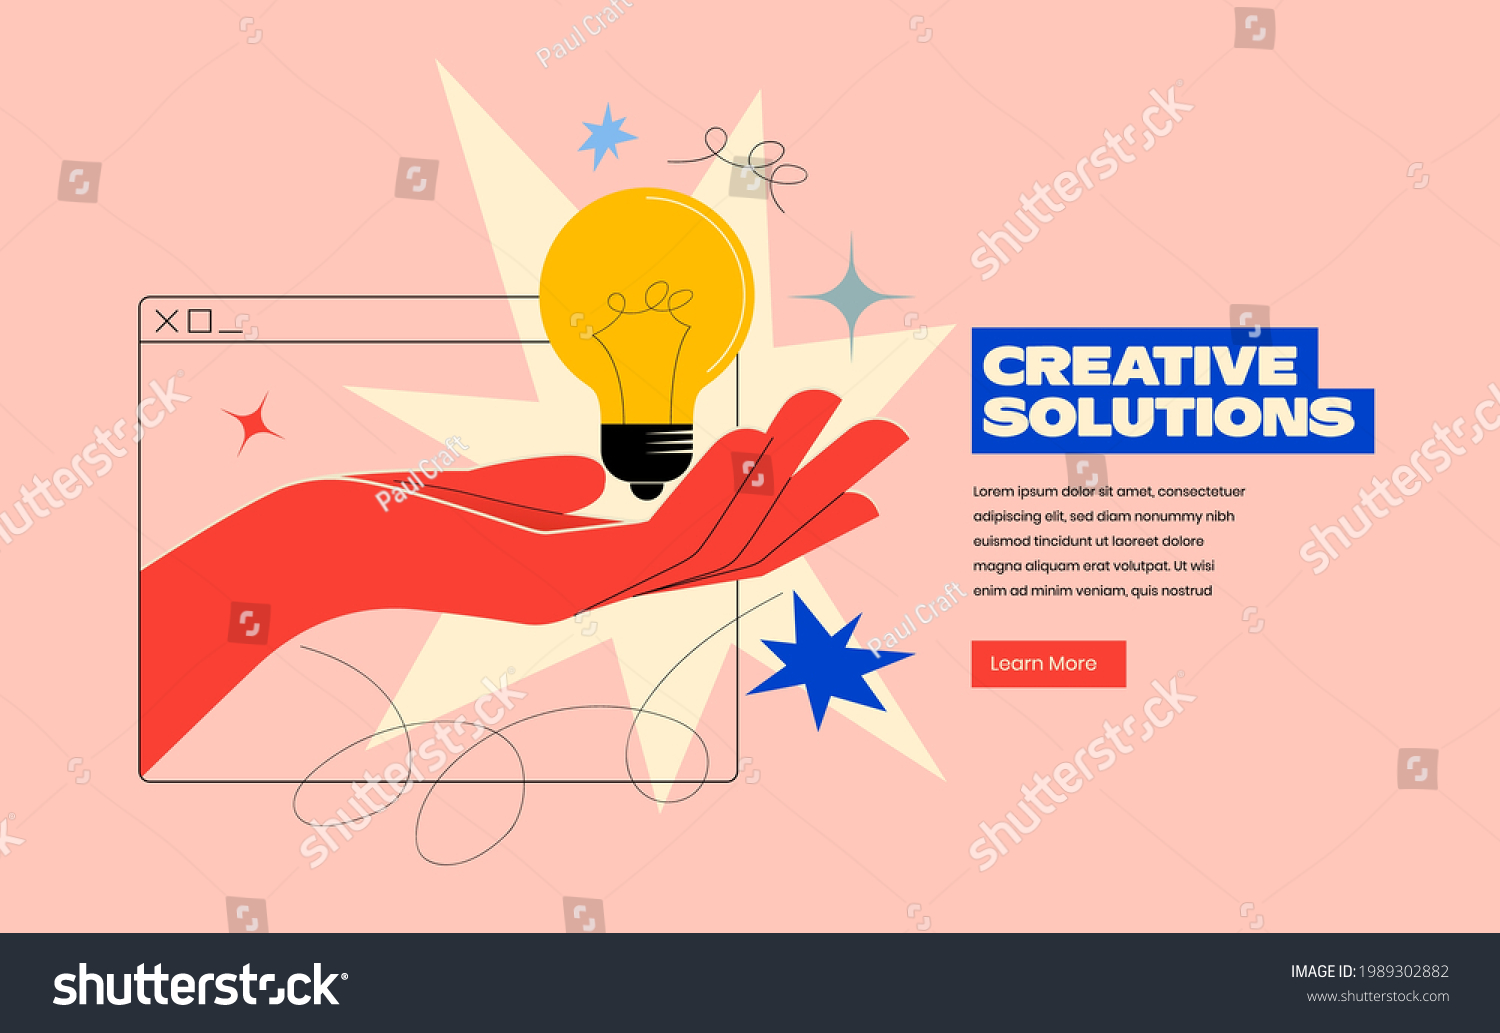 SVG of Creative solutions or ideas web banner design or landing page template for creative agency with hand comes out of the screen with light bulb and colorful abstract geometric shapes. Vector illustration svg